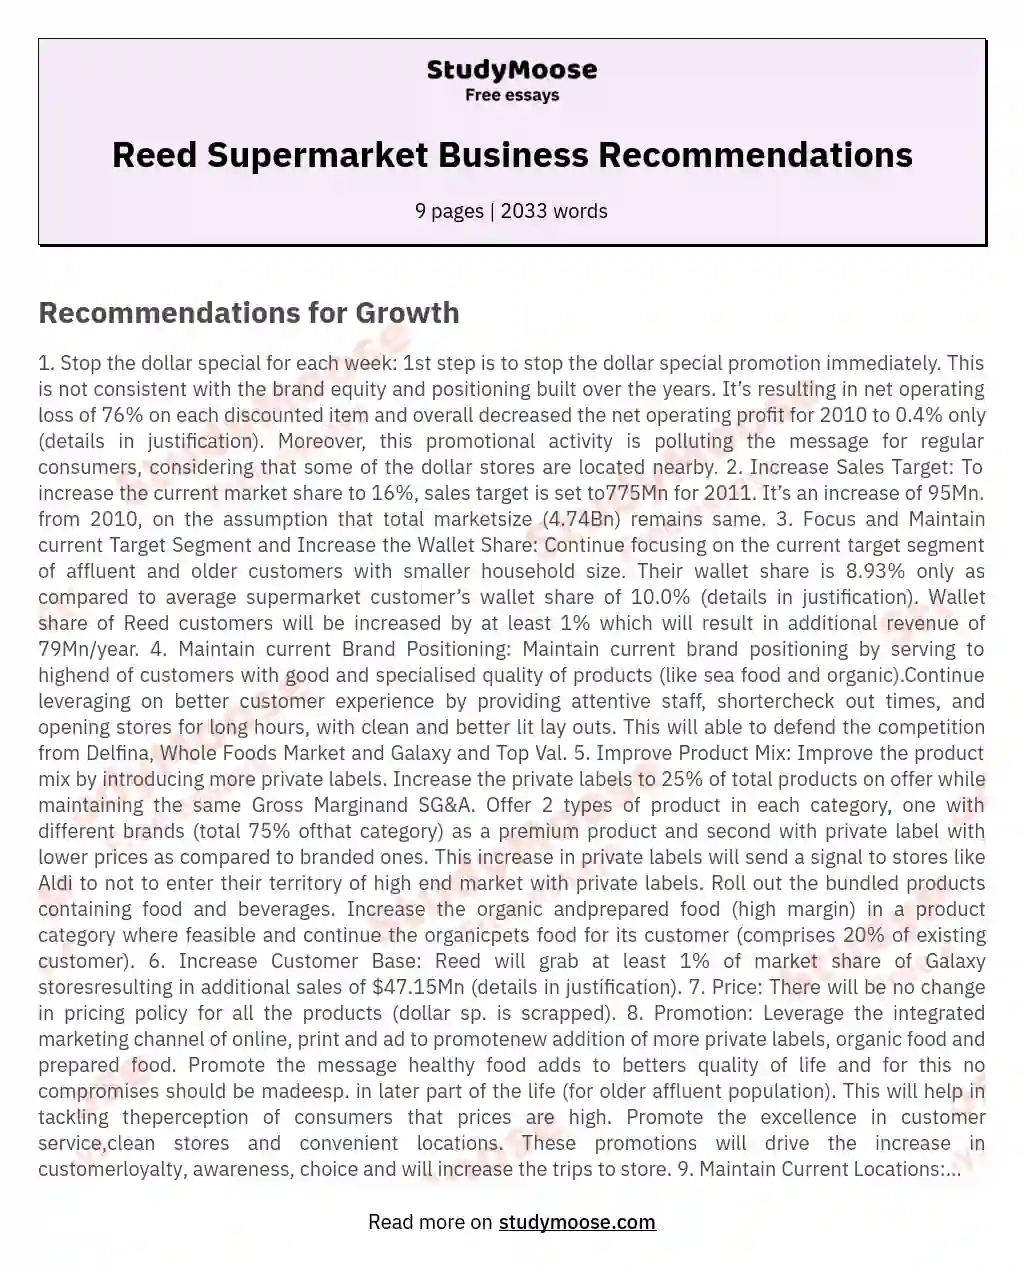 Reed Supermarket Business Recommendations